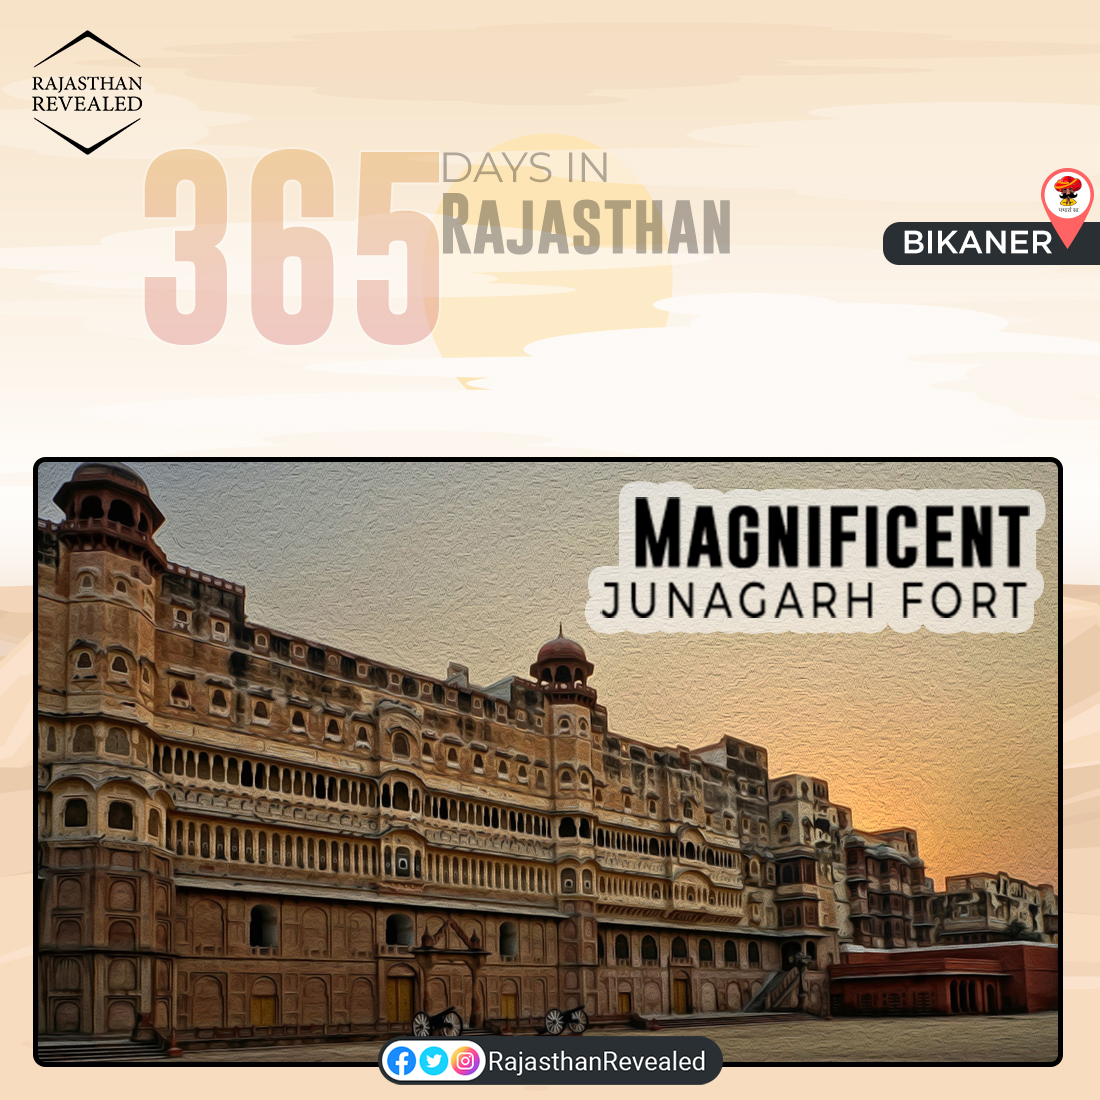 #365DaysRajasthan The grand #JunagarhFort in #Bikaner tells stories of all the rulers who have passed through it through centuries. 

#bikaneri #bikanerdiaries #bikanercity #bikanertourism #bikanerdairies #apnabikaner #rajasthantourism #rajasthan #rajasthaniculture